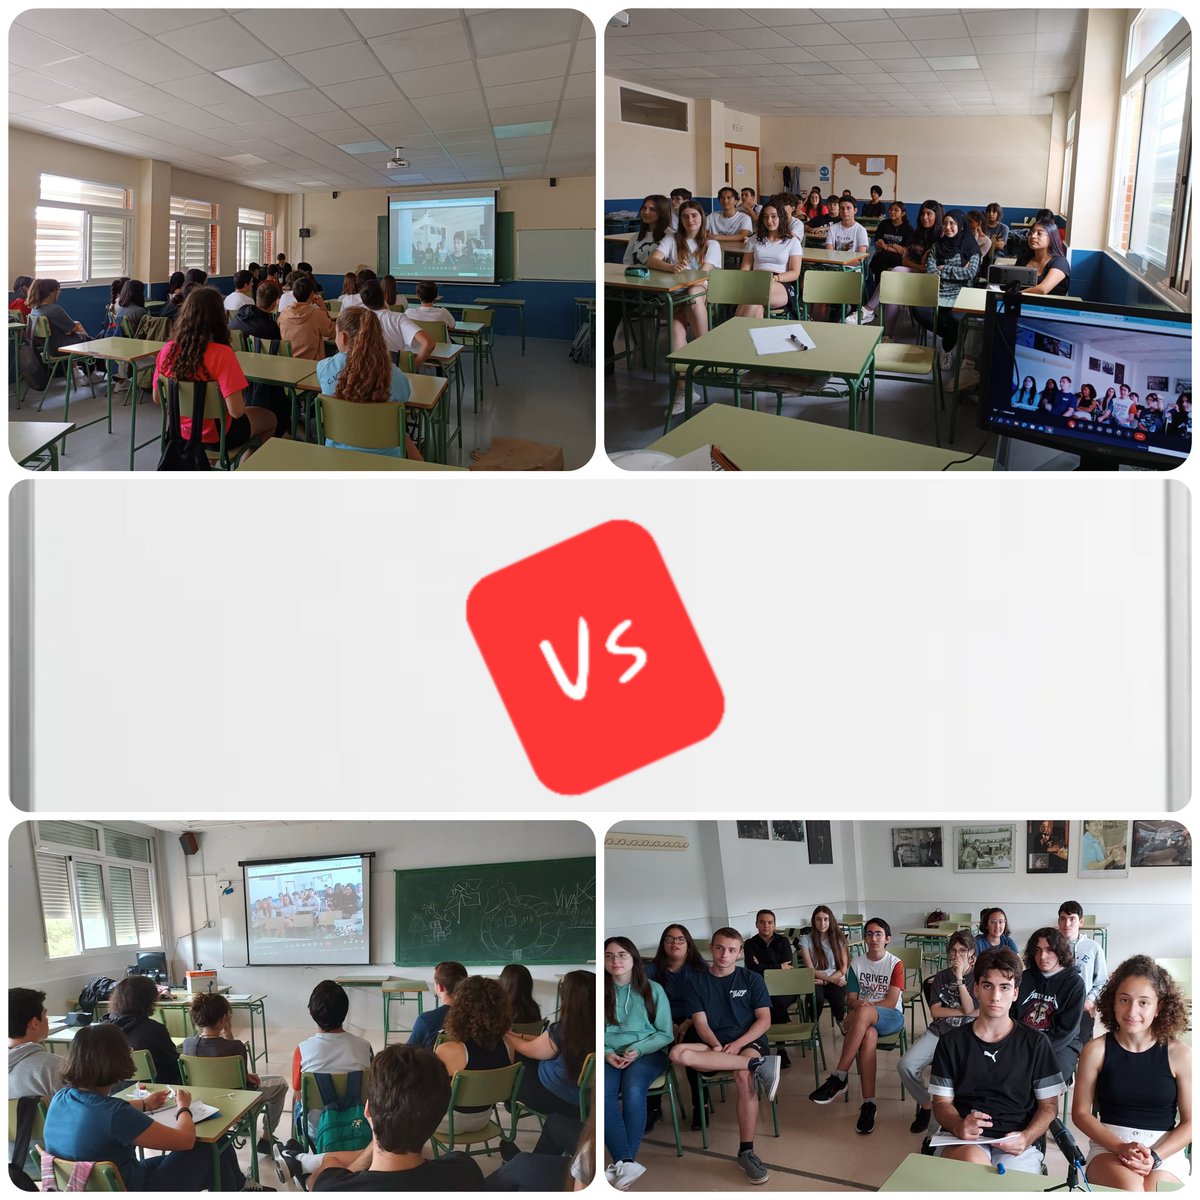 Seeing how smart the kids of Mother Earth project are, we had the brilliant idea of a videoconference confronting them in competition. Results? They had lots of fun.
#eTMotherEarth @eTwinnico @eTwinning_es @iesmenarguez @iesfelipe2